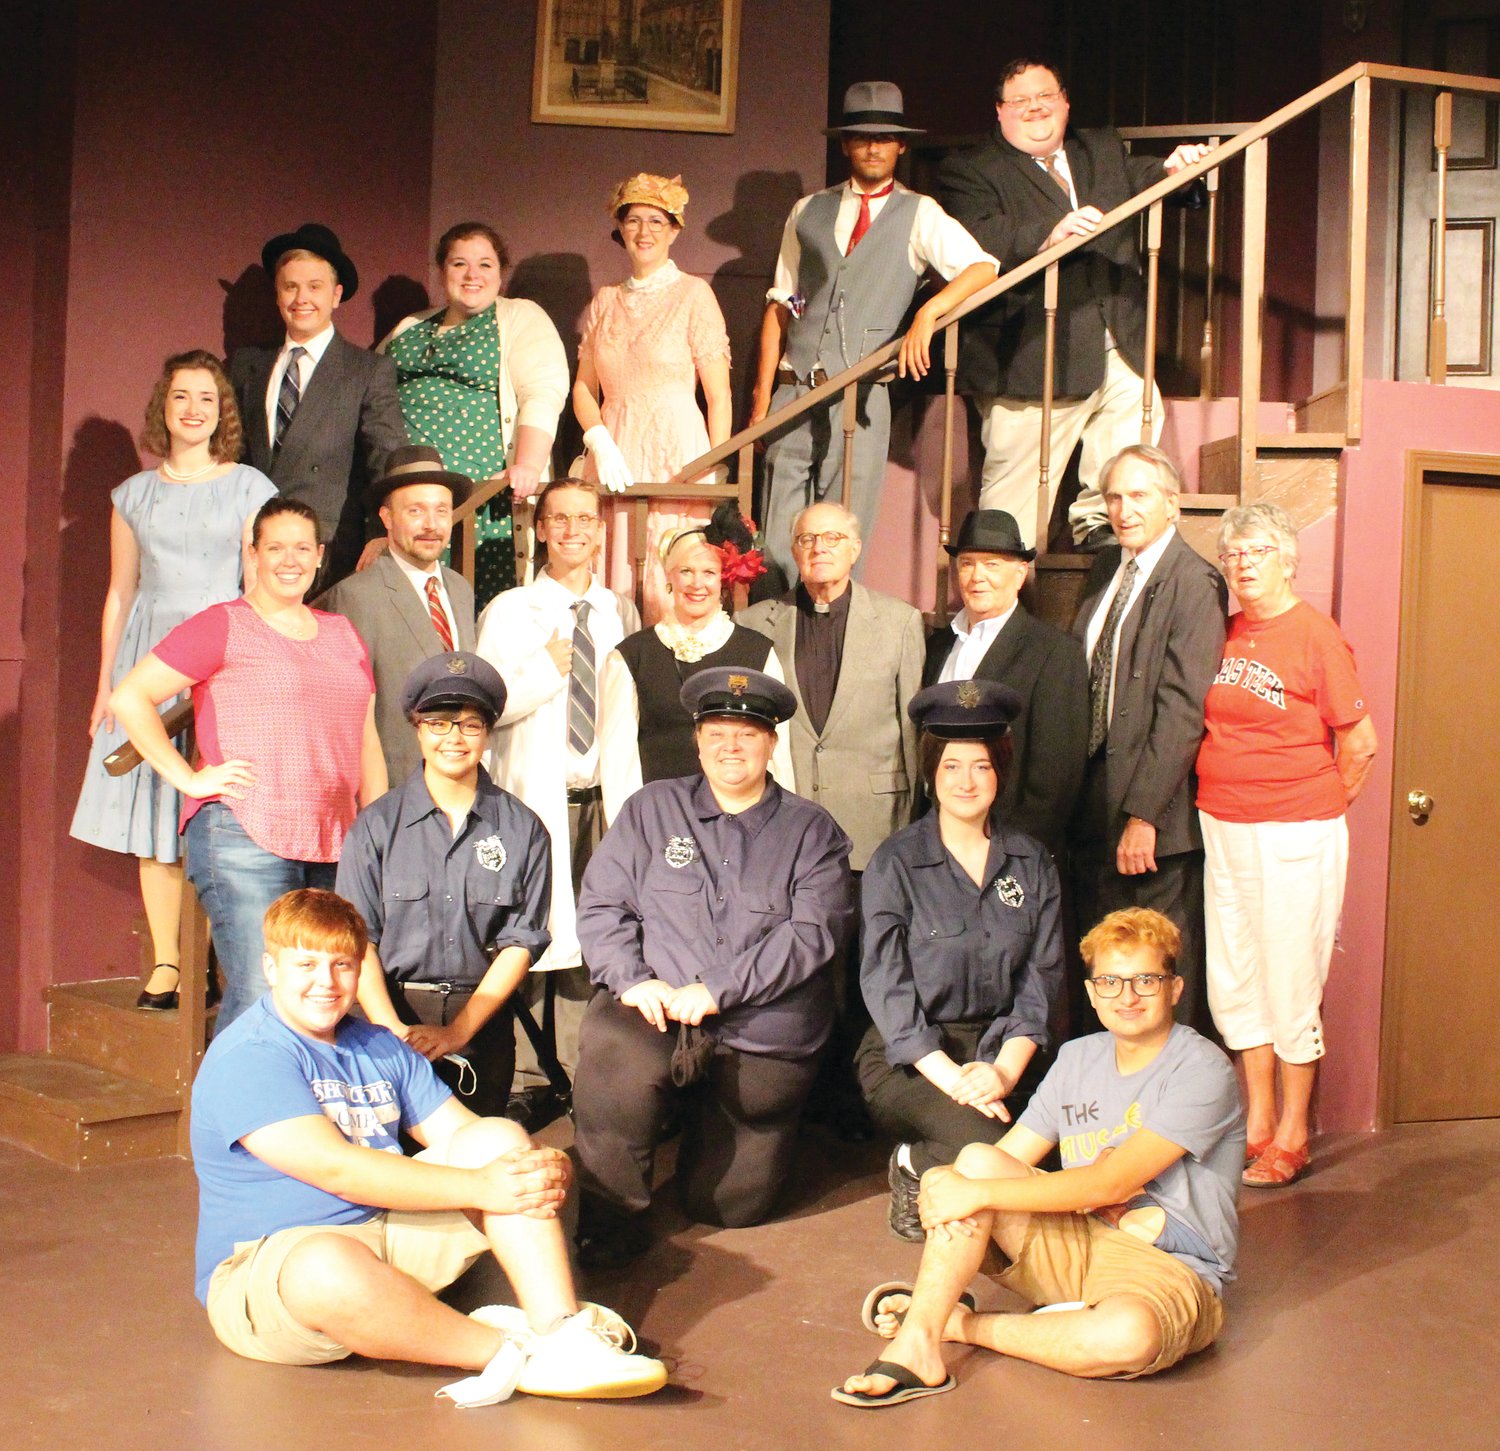 Members of the cast for Arsenic and Old Lace, are, from left, front row, Harmon Hann and Ross Tunin (both techs); second row, Alecsandra Baldwin (Officer Brophy), Lora Burris (Officer O’Hara), Nicole Hays (Officer Klein); third row, Katie Melvin (director), Adrian Burris (Mr. Gibbs), Alan Hobson (Dr. Einstein), Carol Homann (Mrs. Harper), Kurt Homann (Rev Dr. Harper), Kenn Clark (Mr. Witherspoon), Keith Strain (Lt. Rooney), Betsy Strain (producer); and on the stairs, Michaela Semak (Elaine Harper), Mike Melvin (Mortimer Brewster), Mary Taylor (Abby Brewster), Cheri Clark (Martha Brewster), Isaac Bacon (Jonathan Brewster) and Dan Martin (Teddy Brewster).